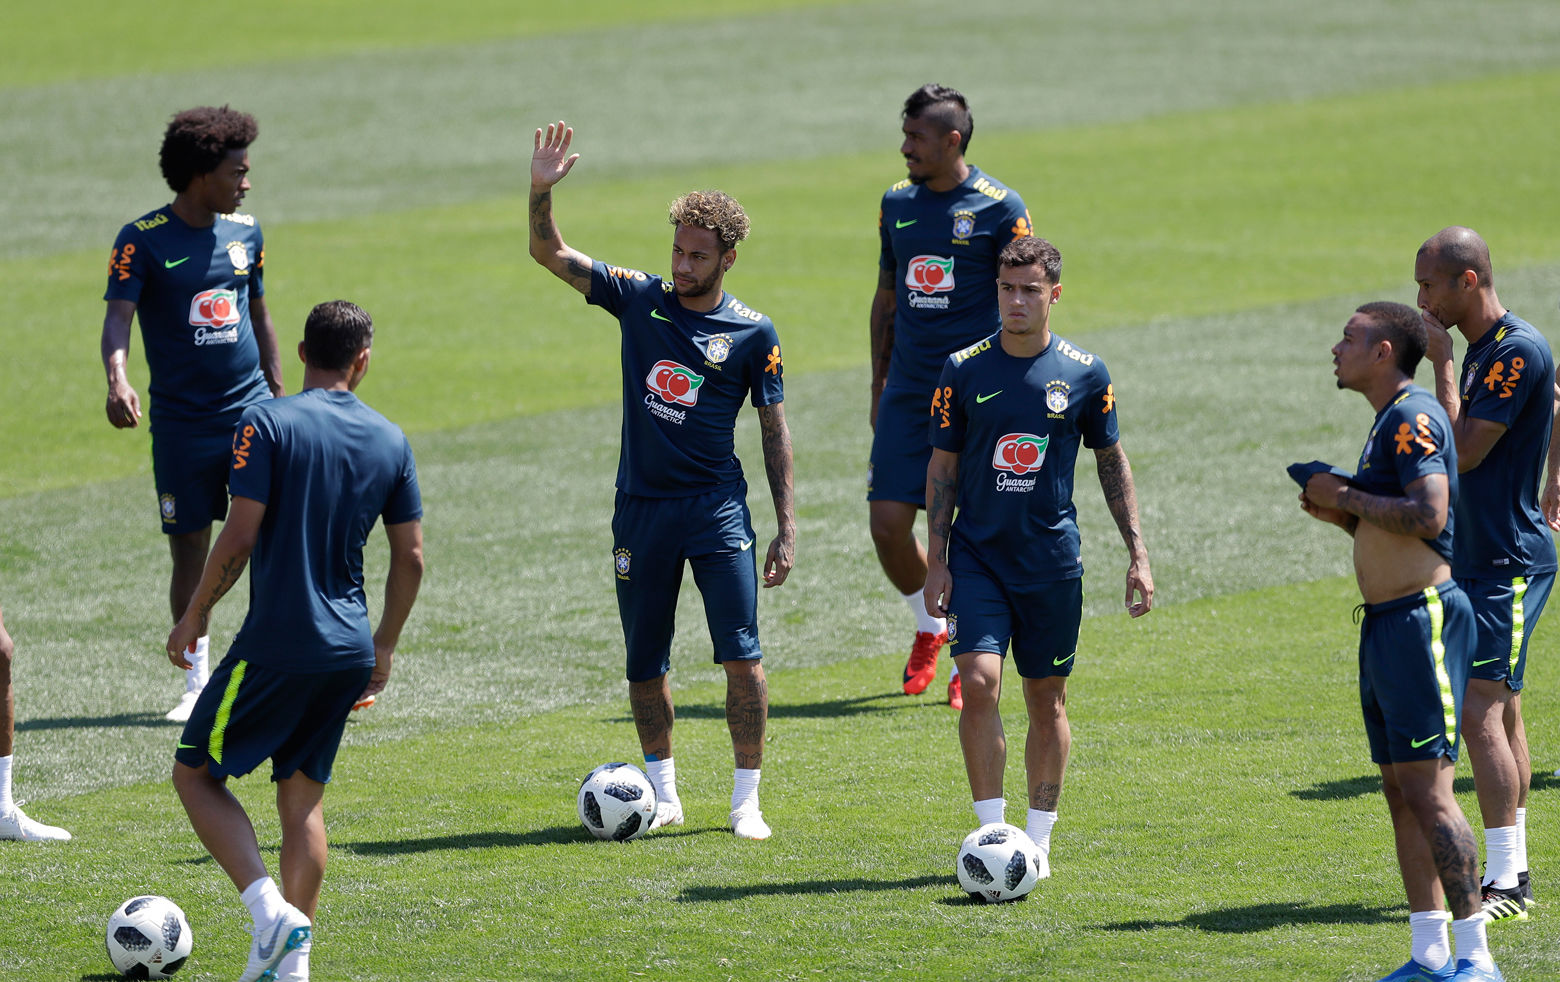 Brazil's Neymar waves to fans during a training session in Sochi, Russia, Tuesday, June 12, 2018. Brazil will face Switzerland on June 17 in the group E for the soccer World Cup. (AP Photo/Andre Penner)